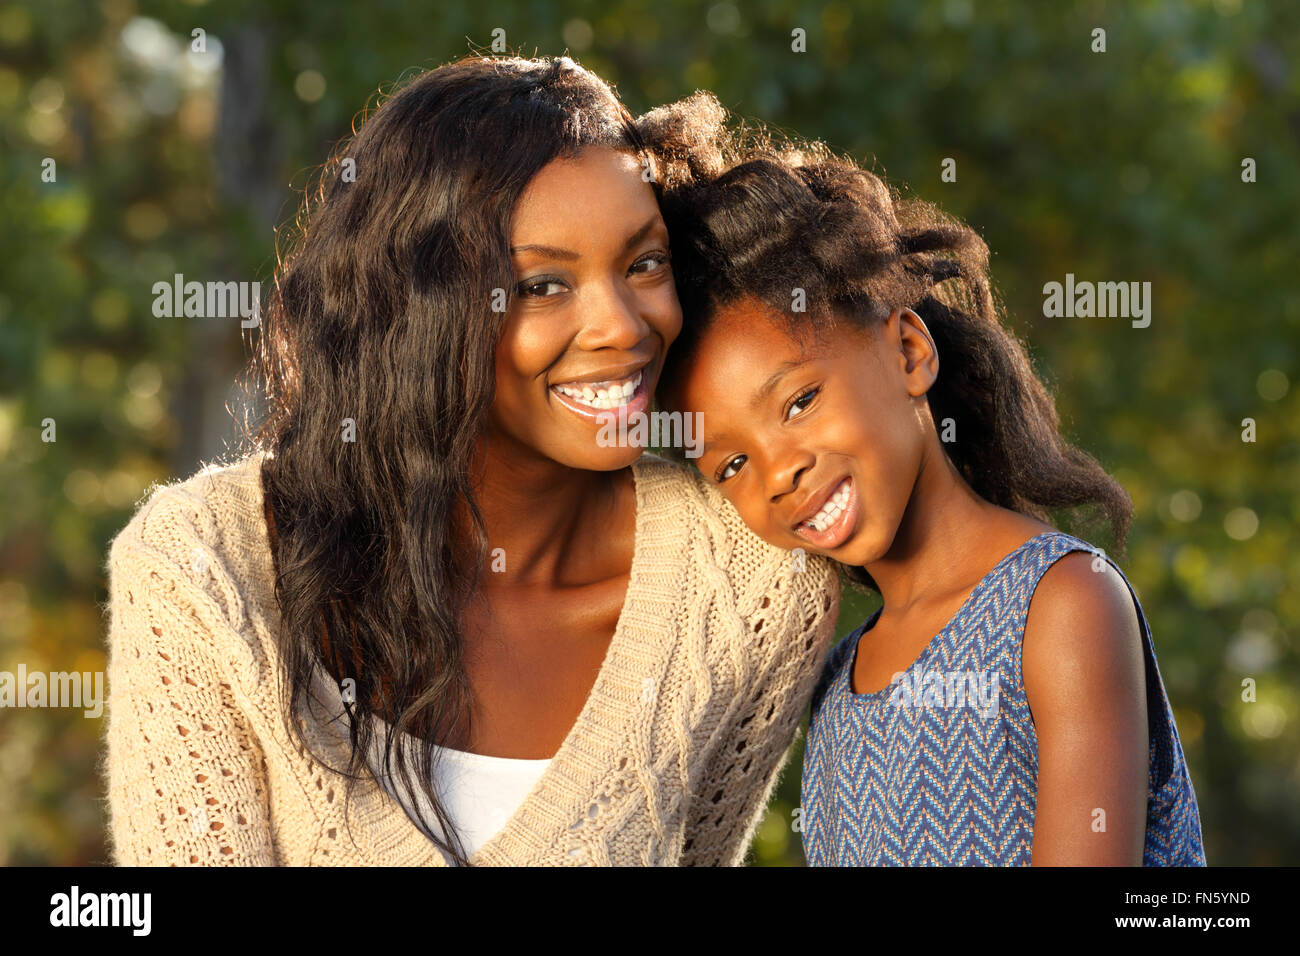 Happy Mother and Child Spending Time Together in a Park Stock Photo